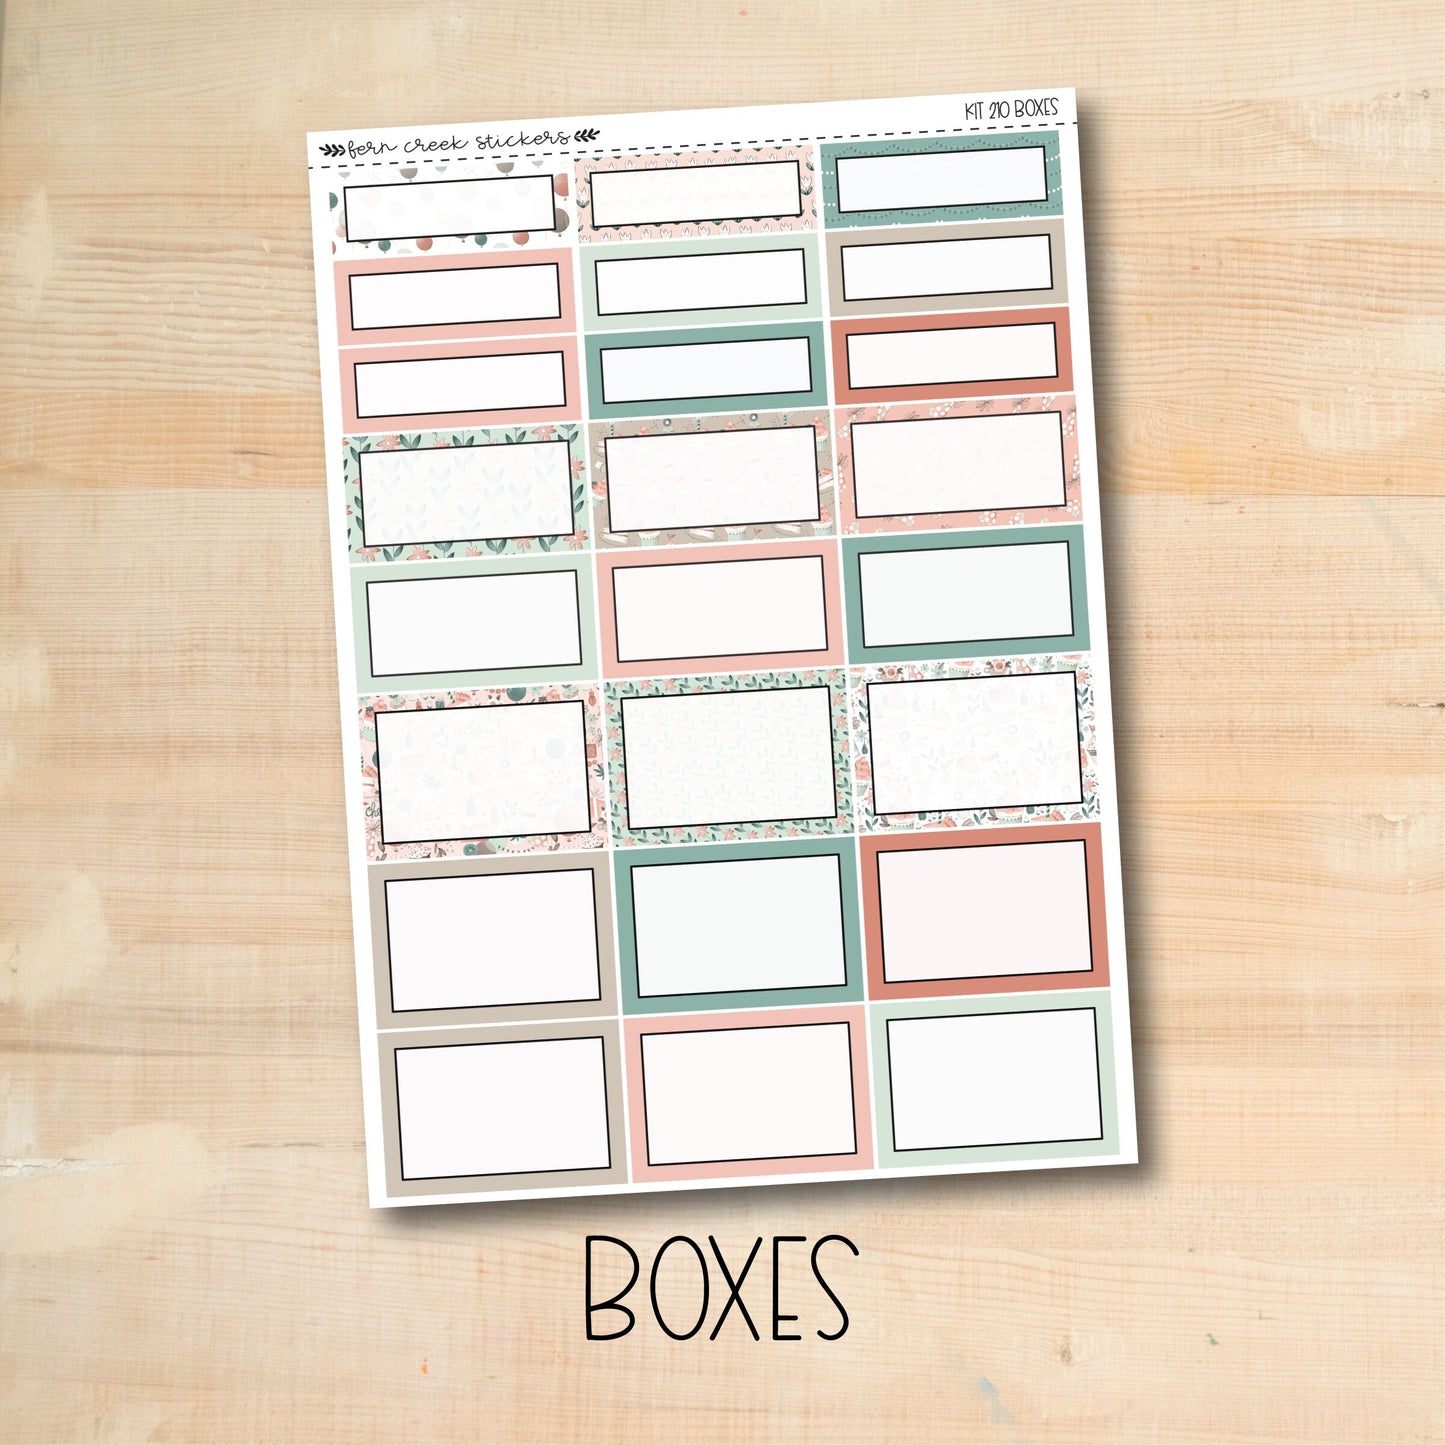 KIT-210 || EAT CAKE weekly planner kit for Erin Condren, Plum Paper, MakseLife and more!